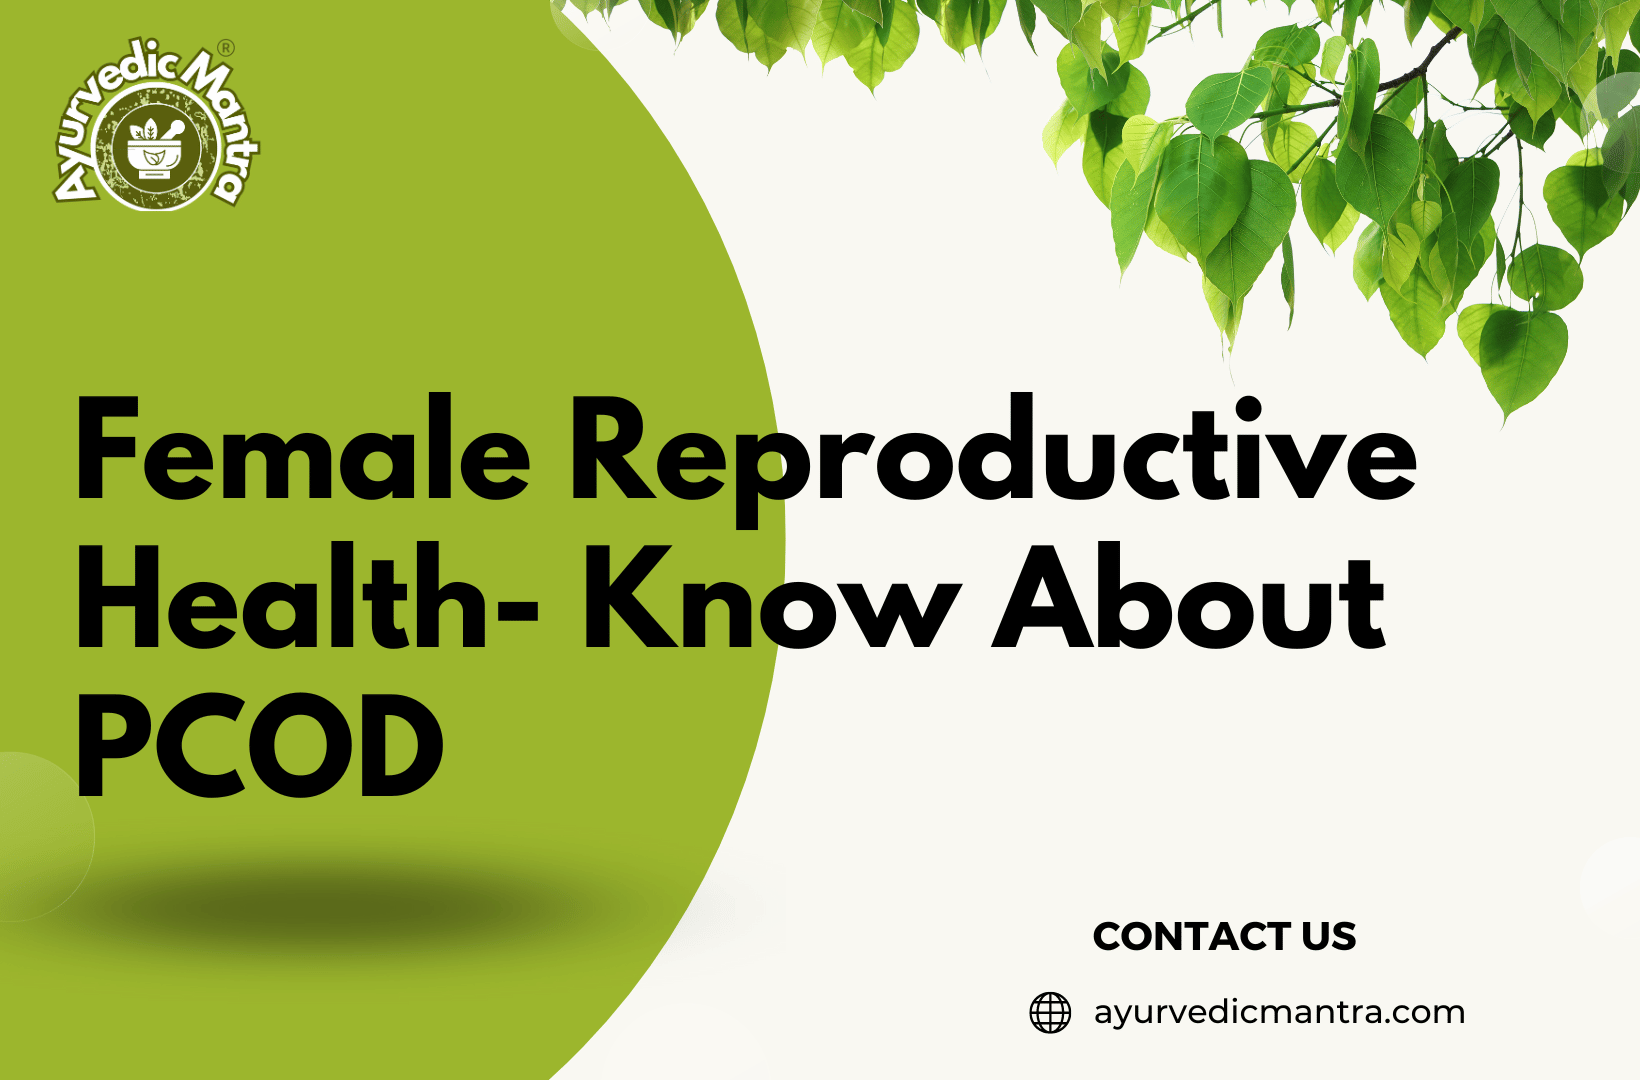 Female Reproductive Health- Know About PCOD